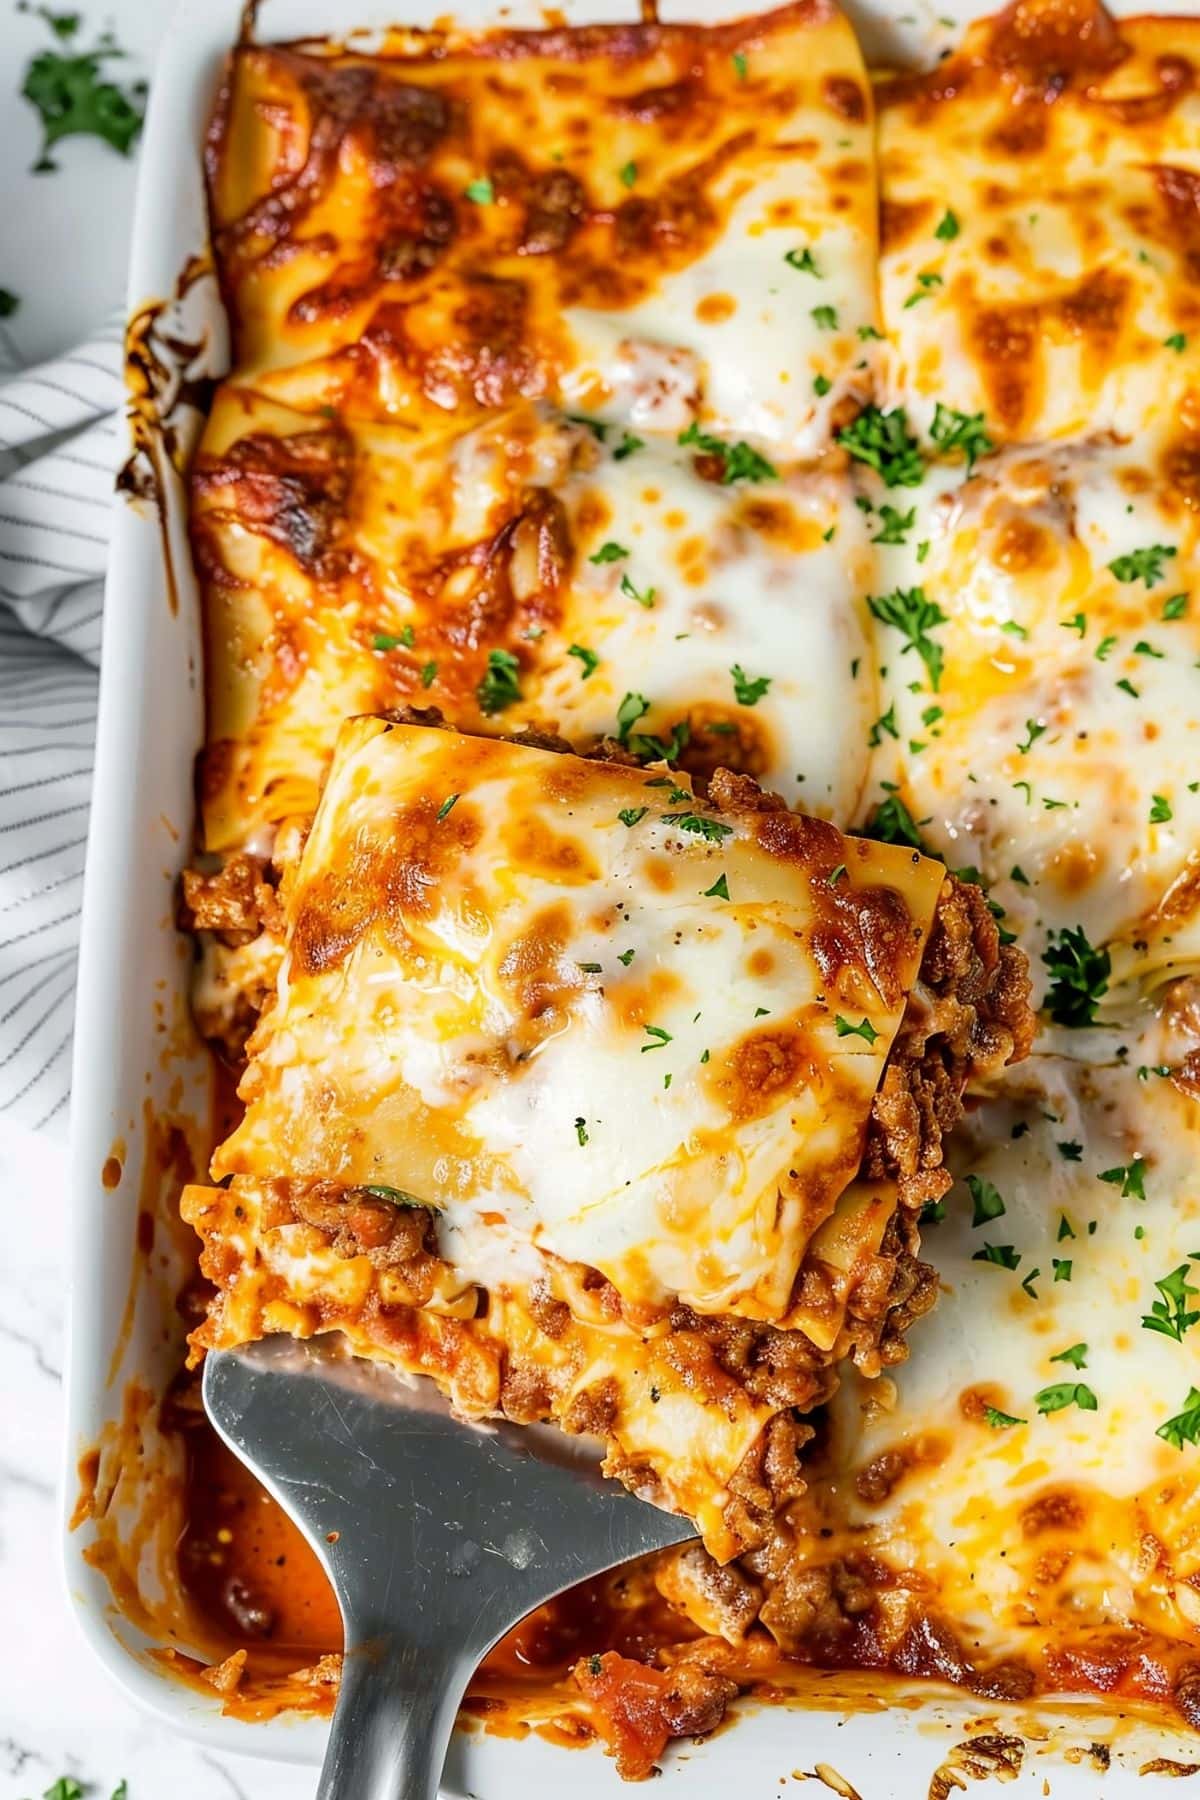 Top View of Prego Lasagna in a White Baking Dish with Spatula Holding Up a Slice